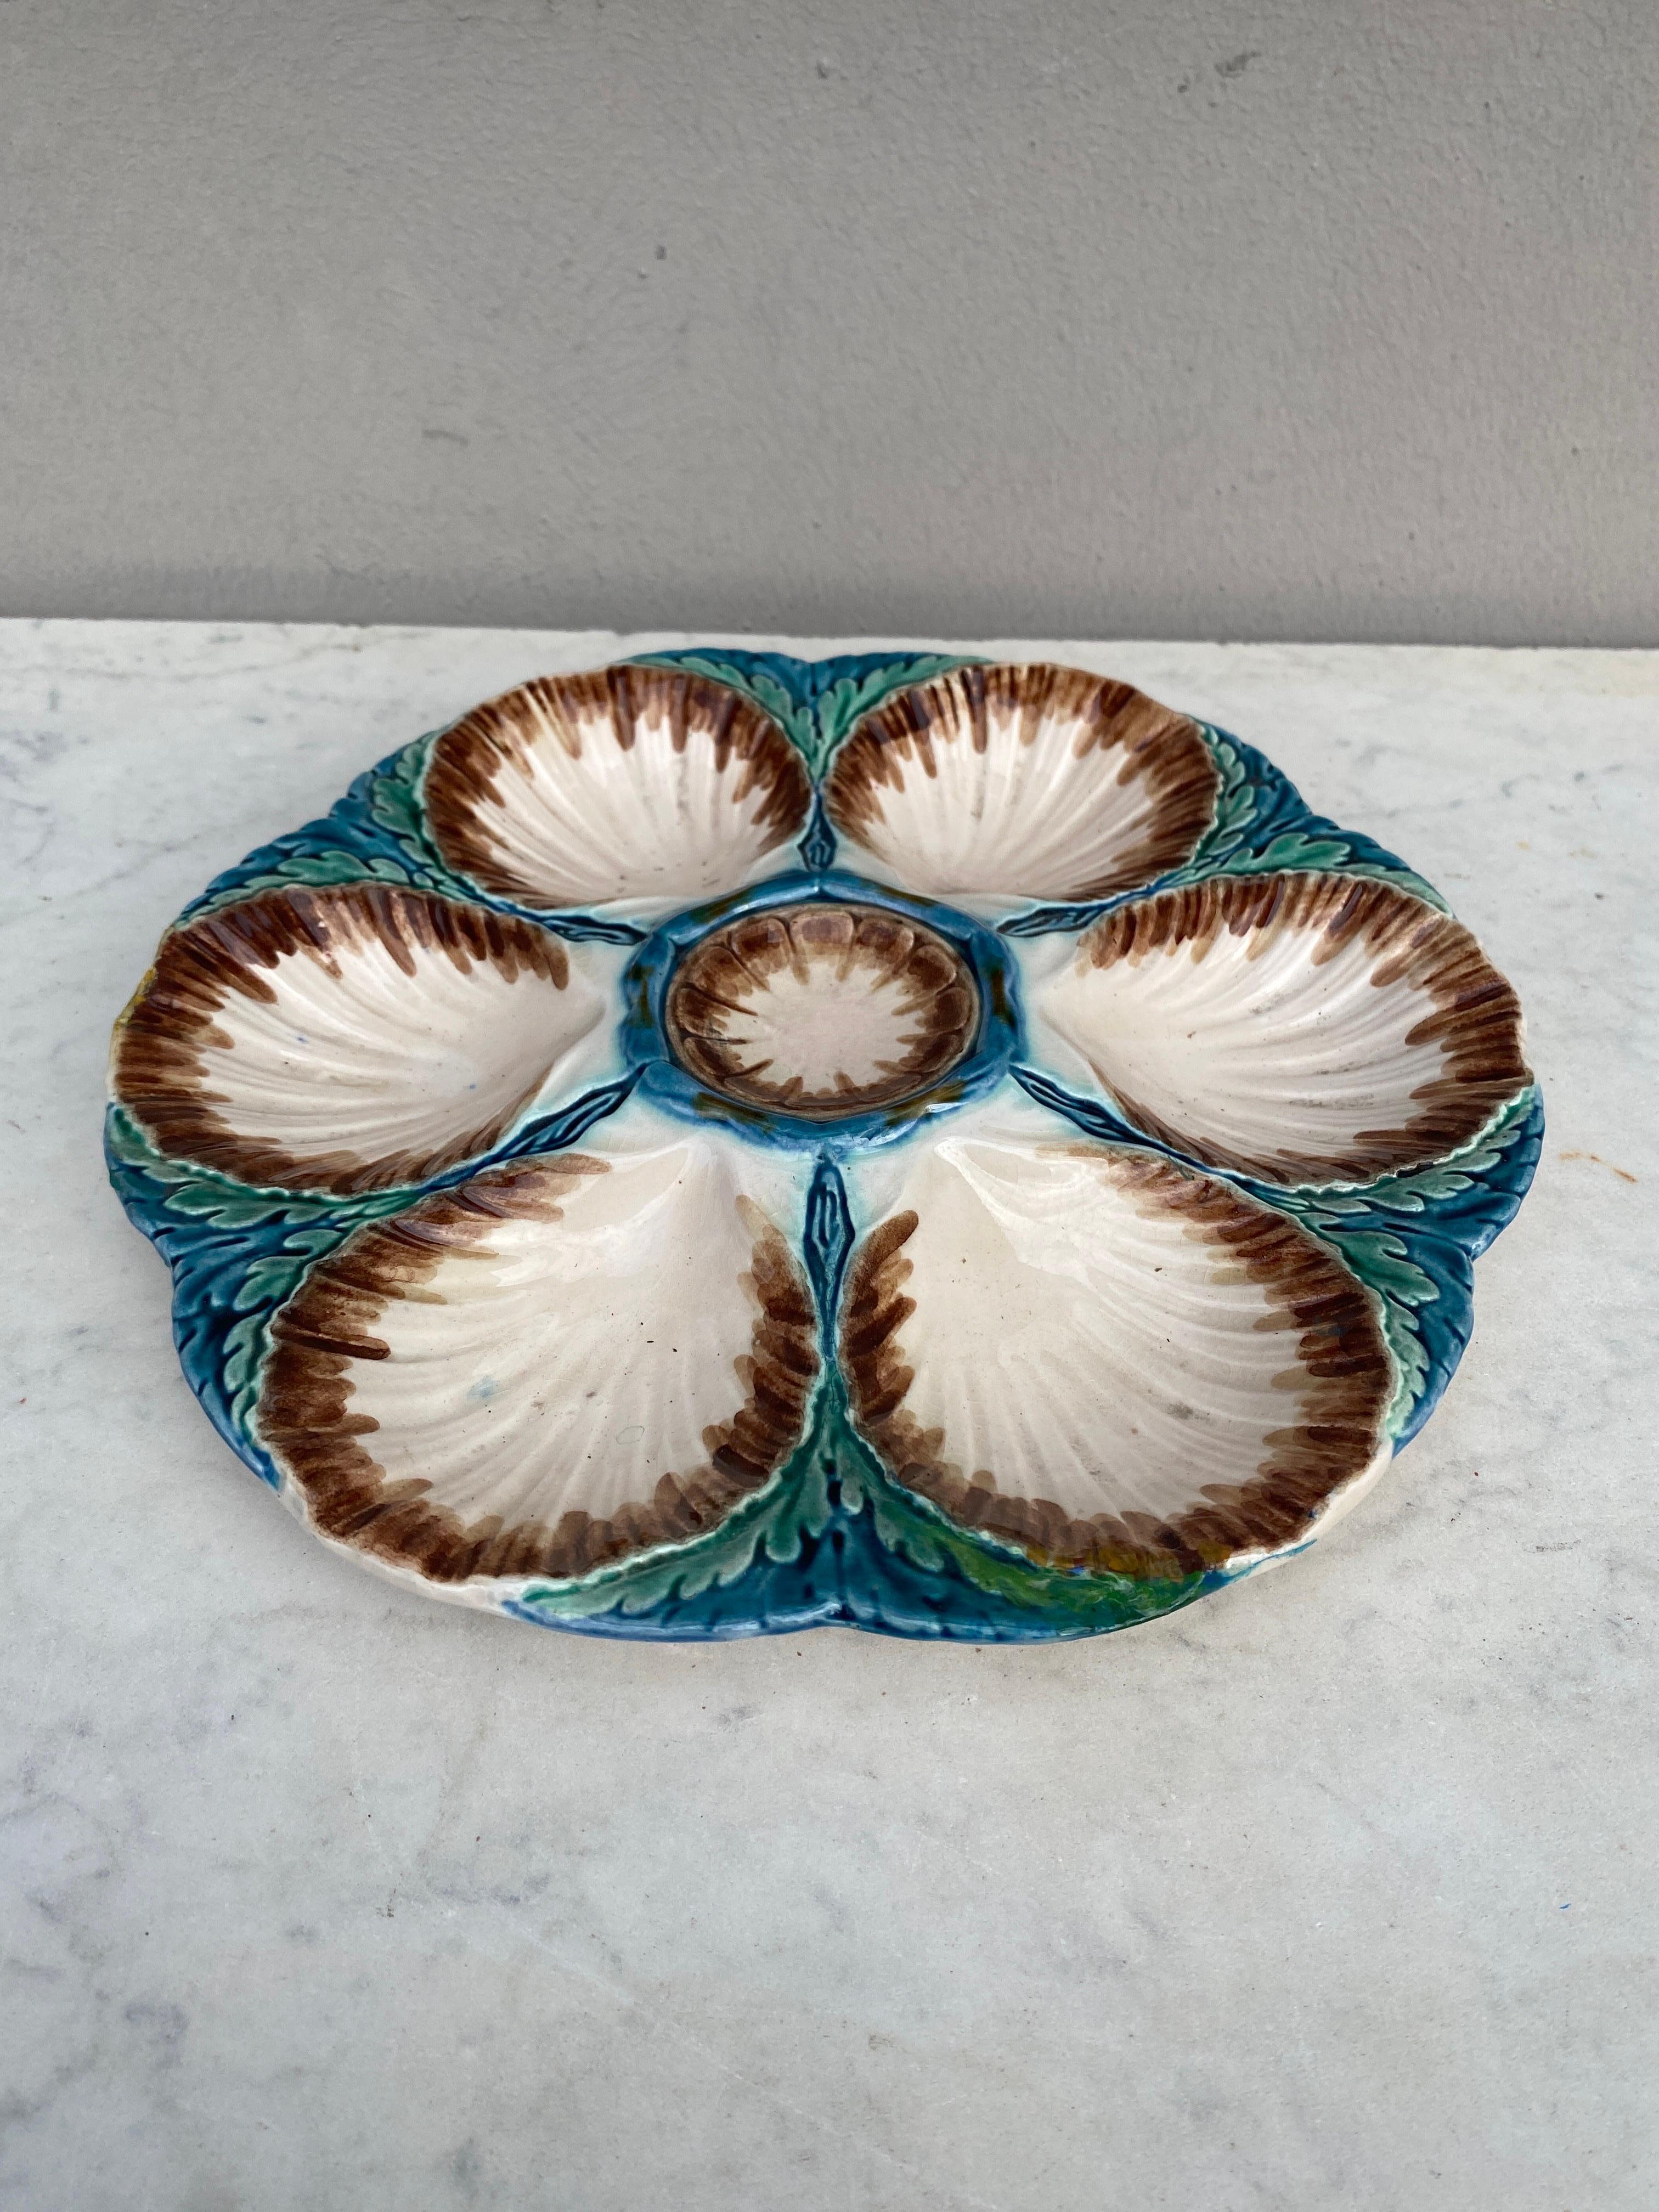 Majolica oyster plate Sarreguemines, circa 1870.
6 Shells and space for the lemon on the center.
Older model.